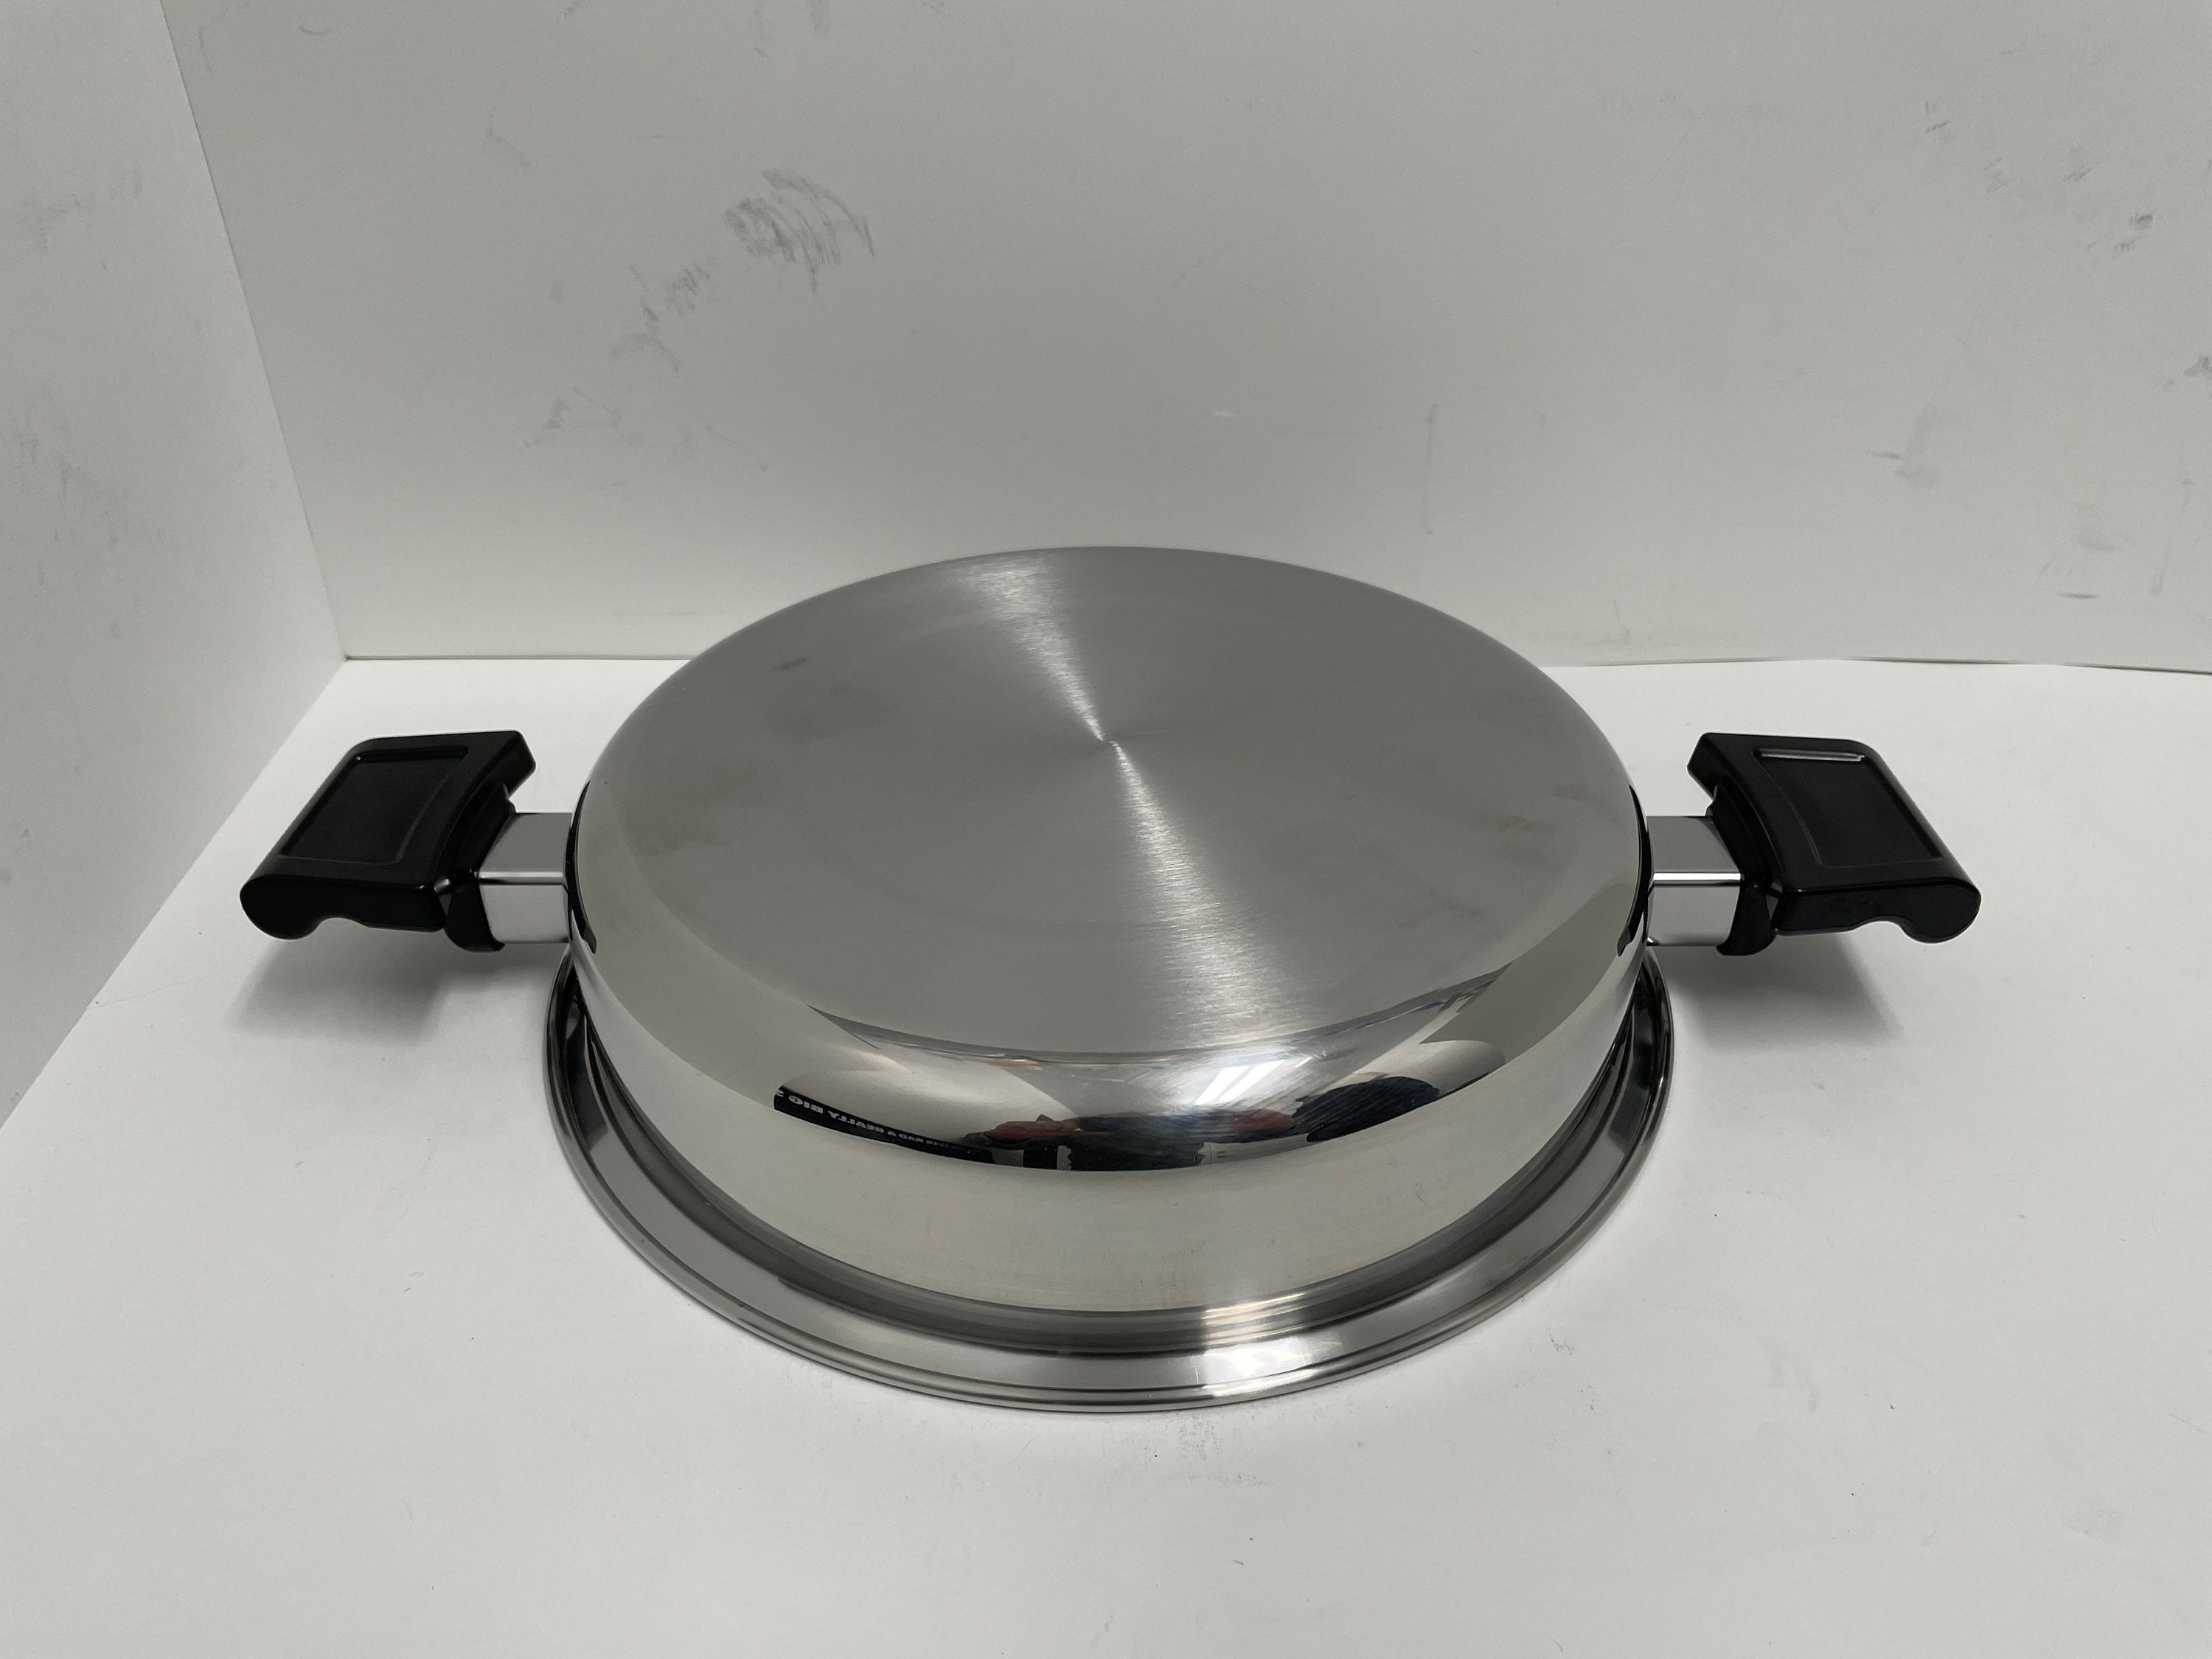 Kitchen Craft West Bend 1 Quart Qt Saucepan & Lid Stainless Steel Made in  USA